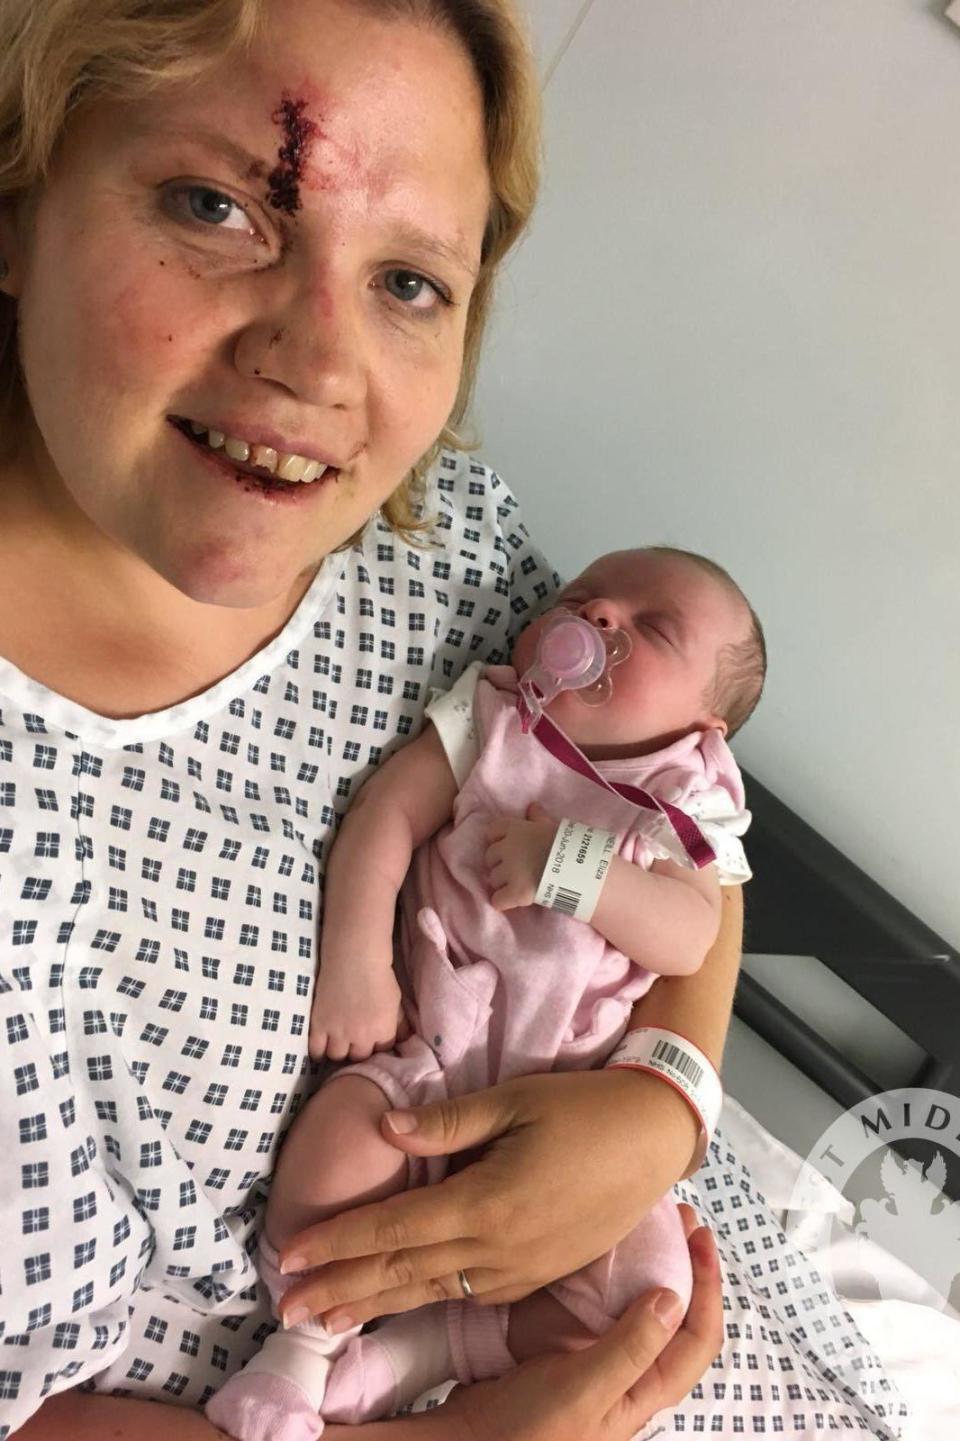 Police said four-week-old baby Eliza was still in her car seat when she was found (West Midlands Police)